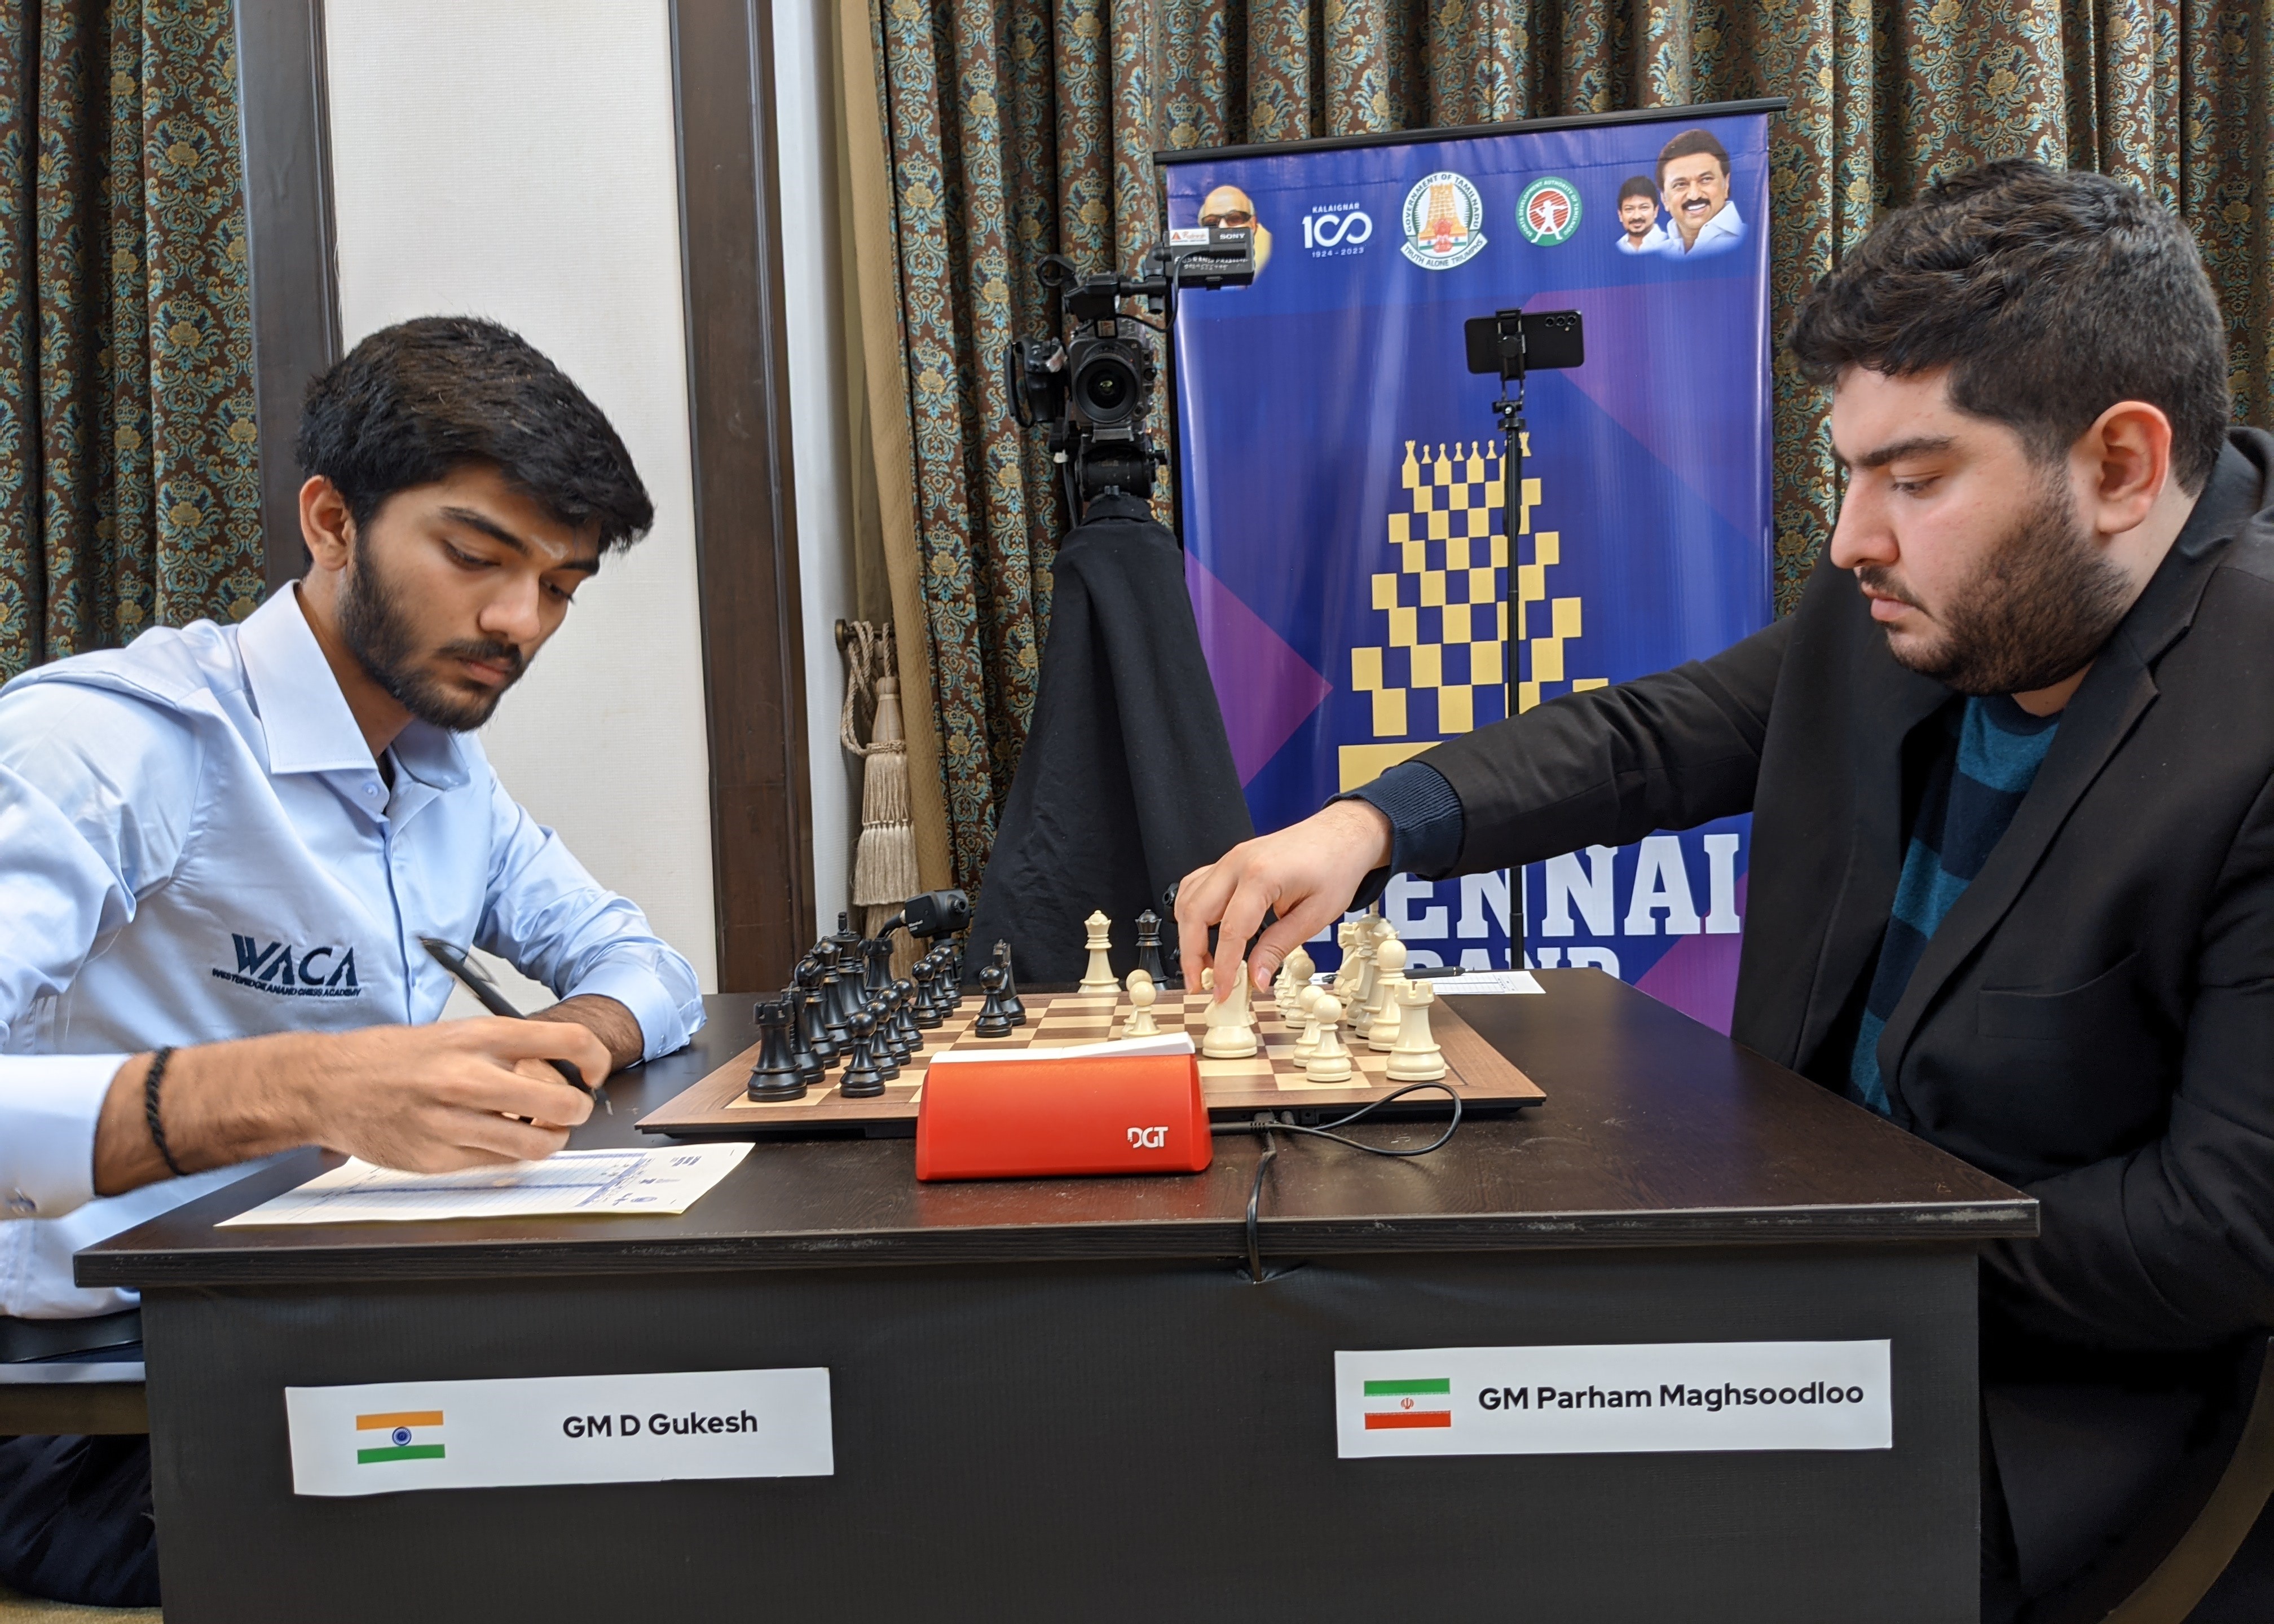 Vishy Anand makes the inaugural first move of Chennai Grand Masters 2023 on  D Gukesh and Arjun Erigaisi's board 📷Shahid Ahmed #Chess…